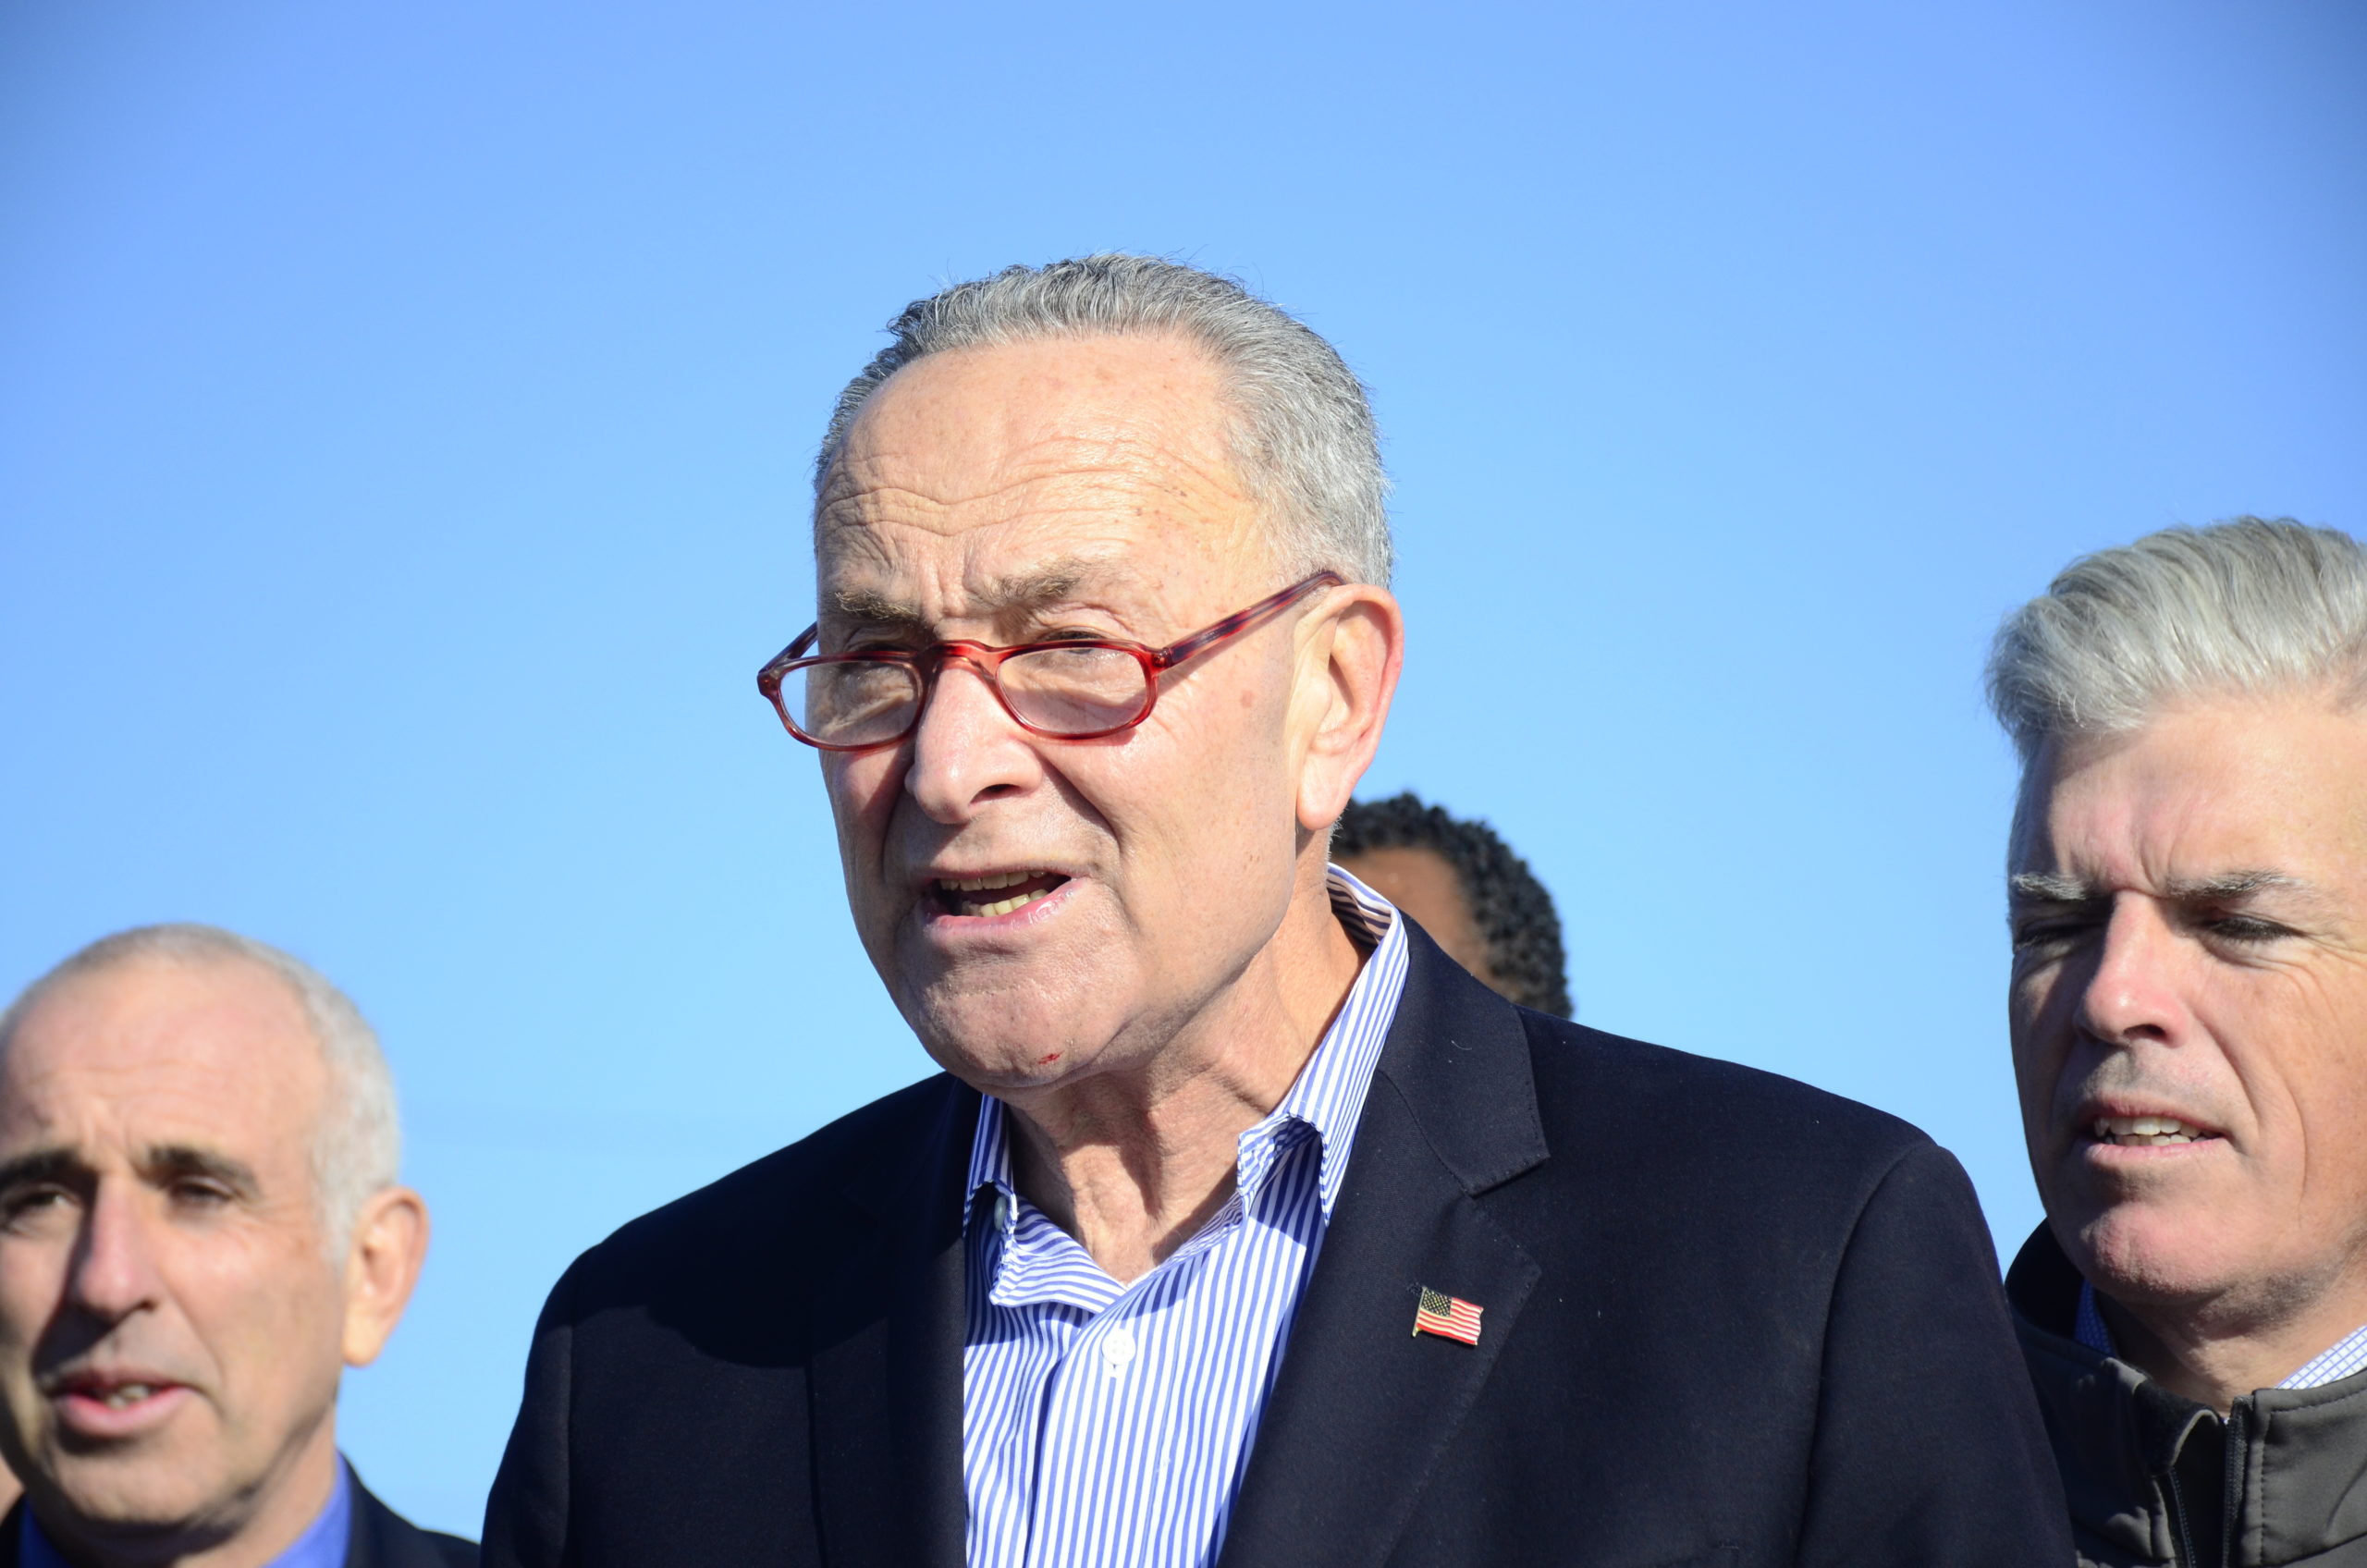 U.S. Senator Chuck Schumer said he is working at the federal level to get additional dredging in Hampton Bays. GREG WEHNER